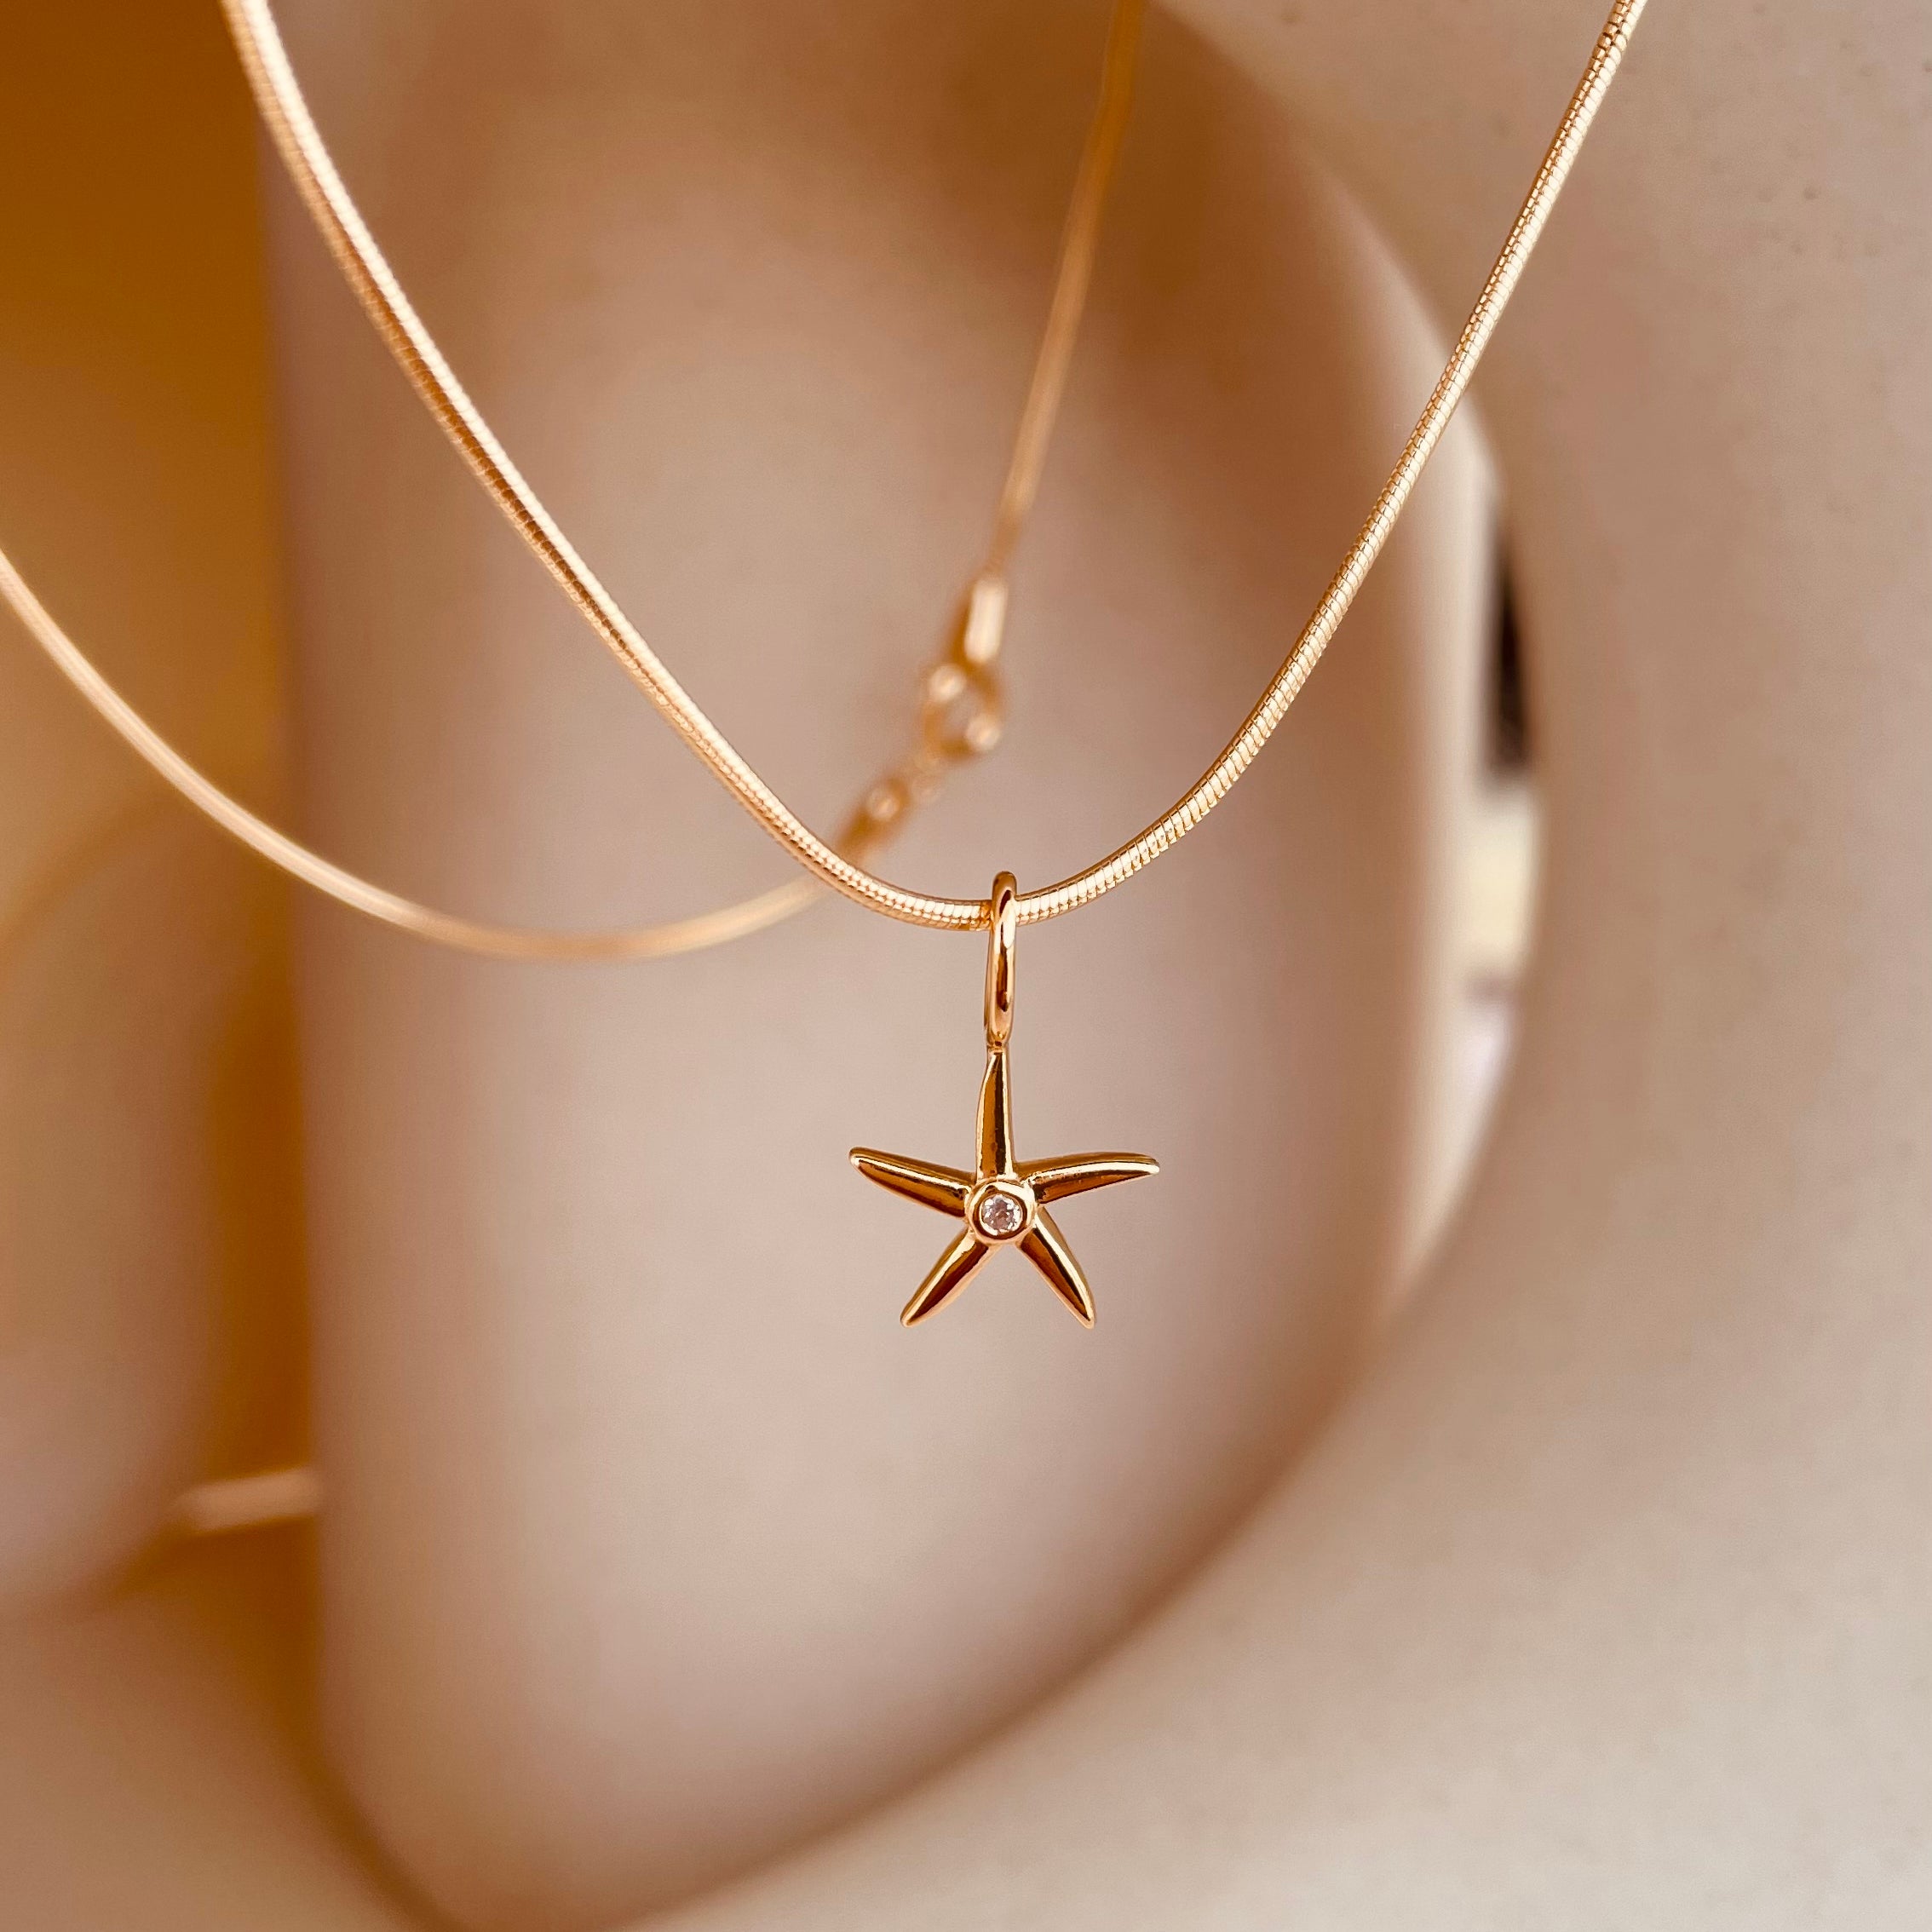 Minimal Starfish Necklace with Snake Chain - Octonov 